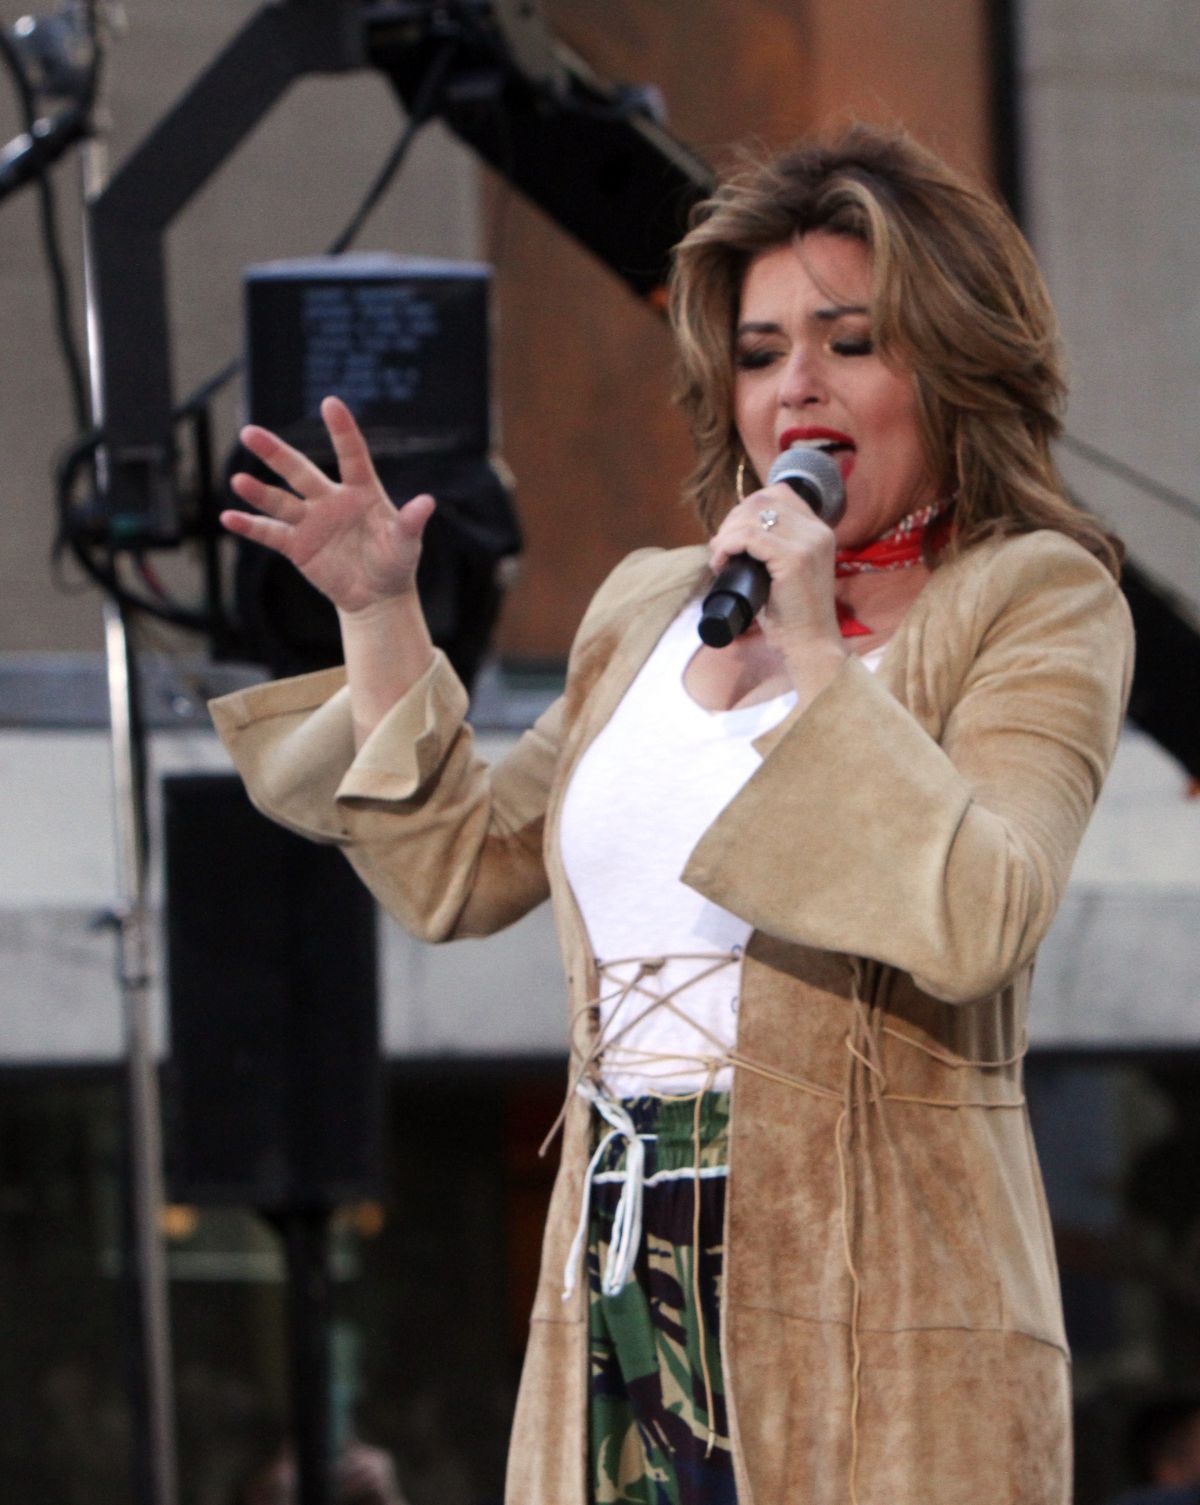 SHANIA TWAIN Performs on Today Show Concert Series in New York 04/30/2018.